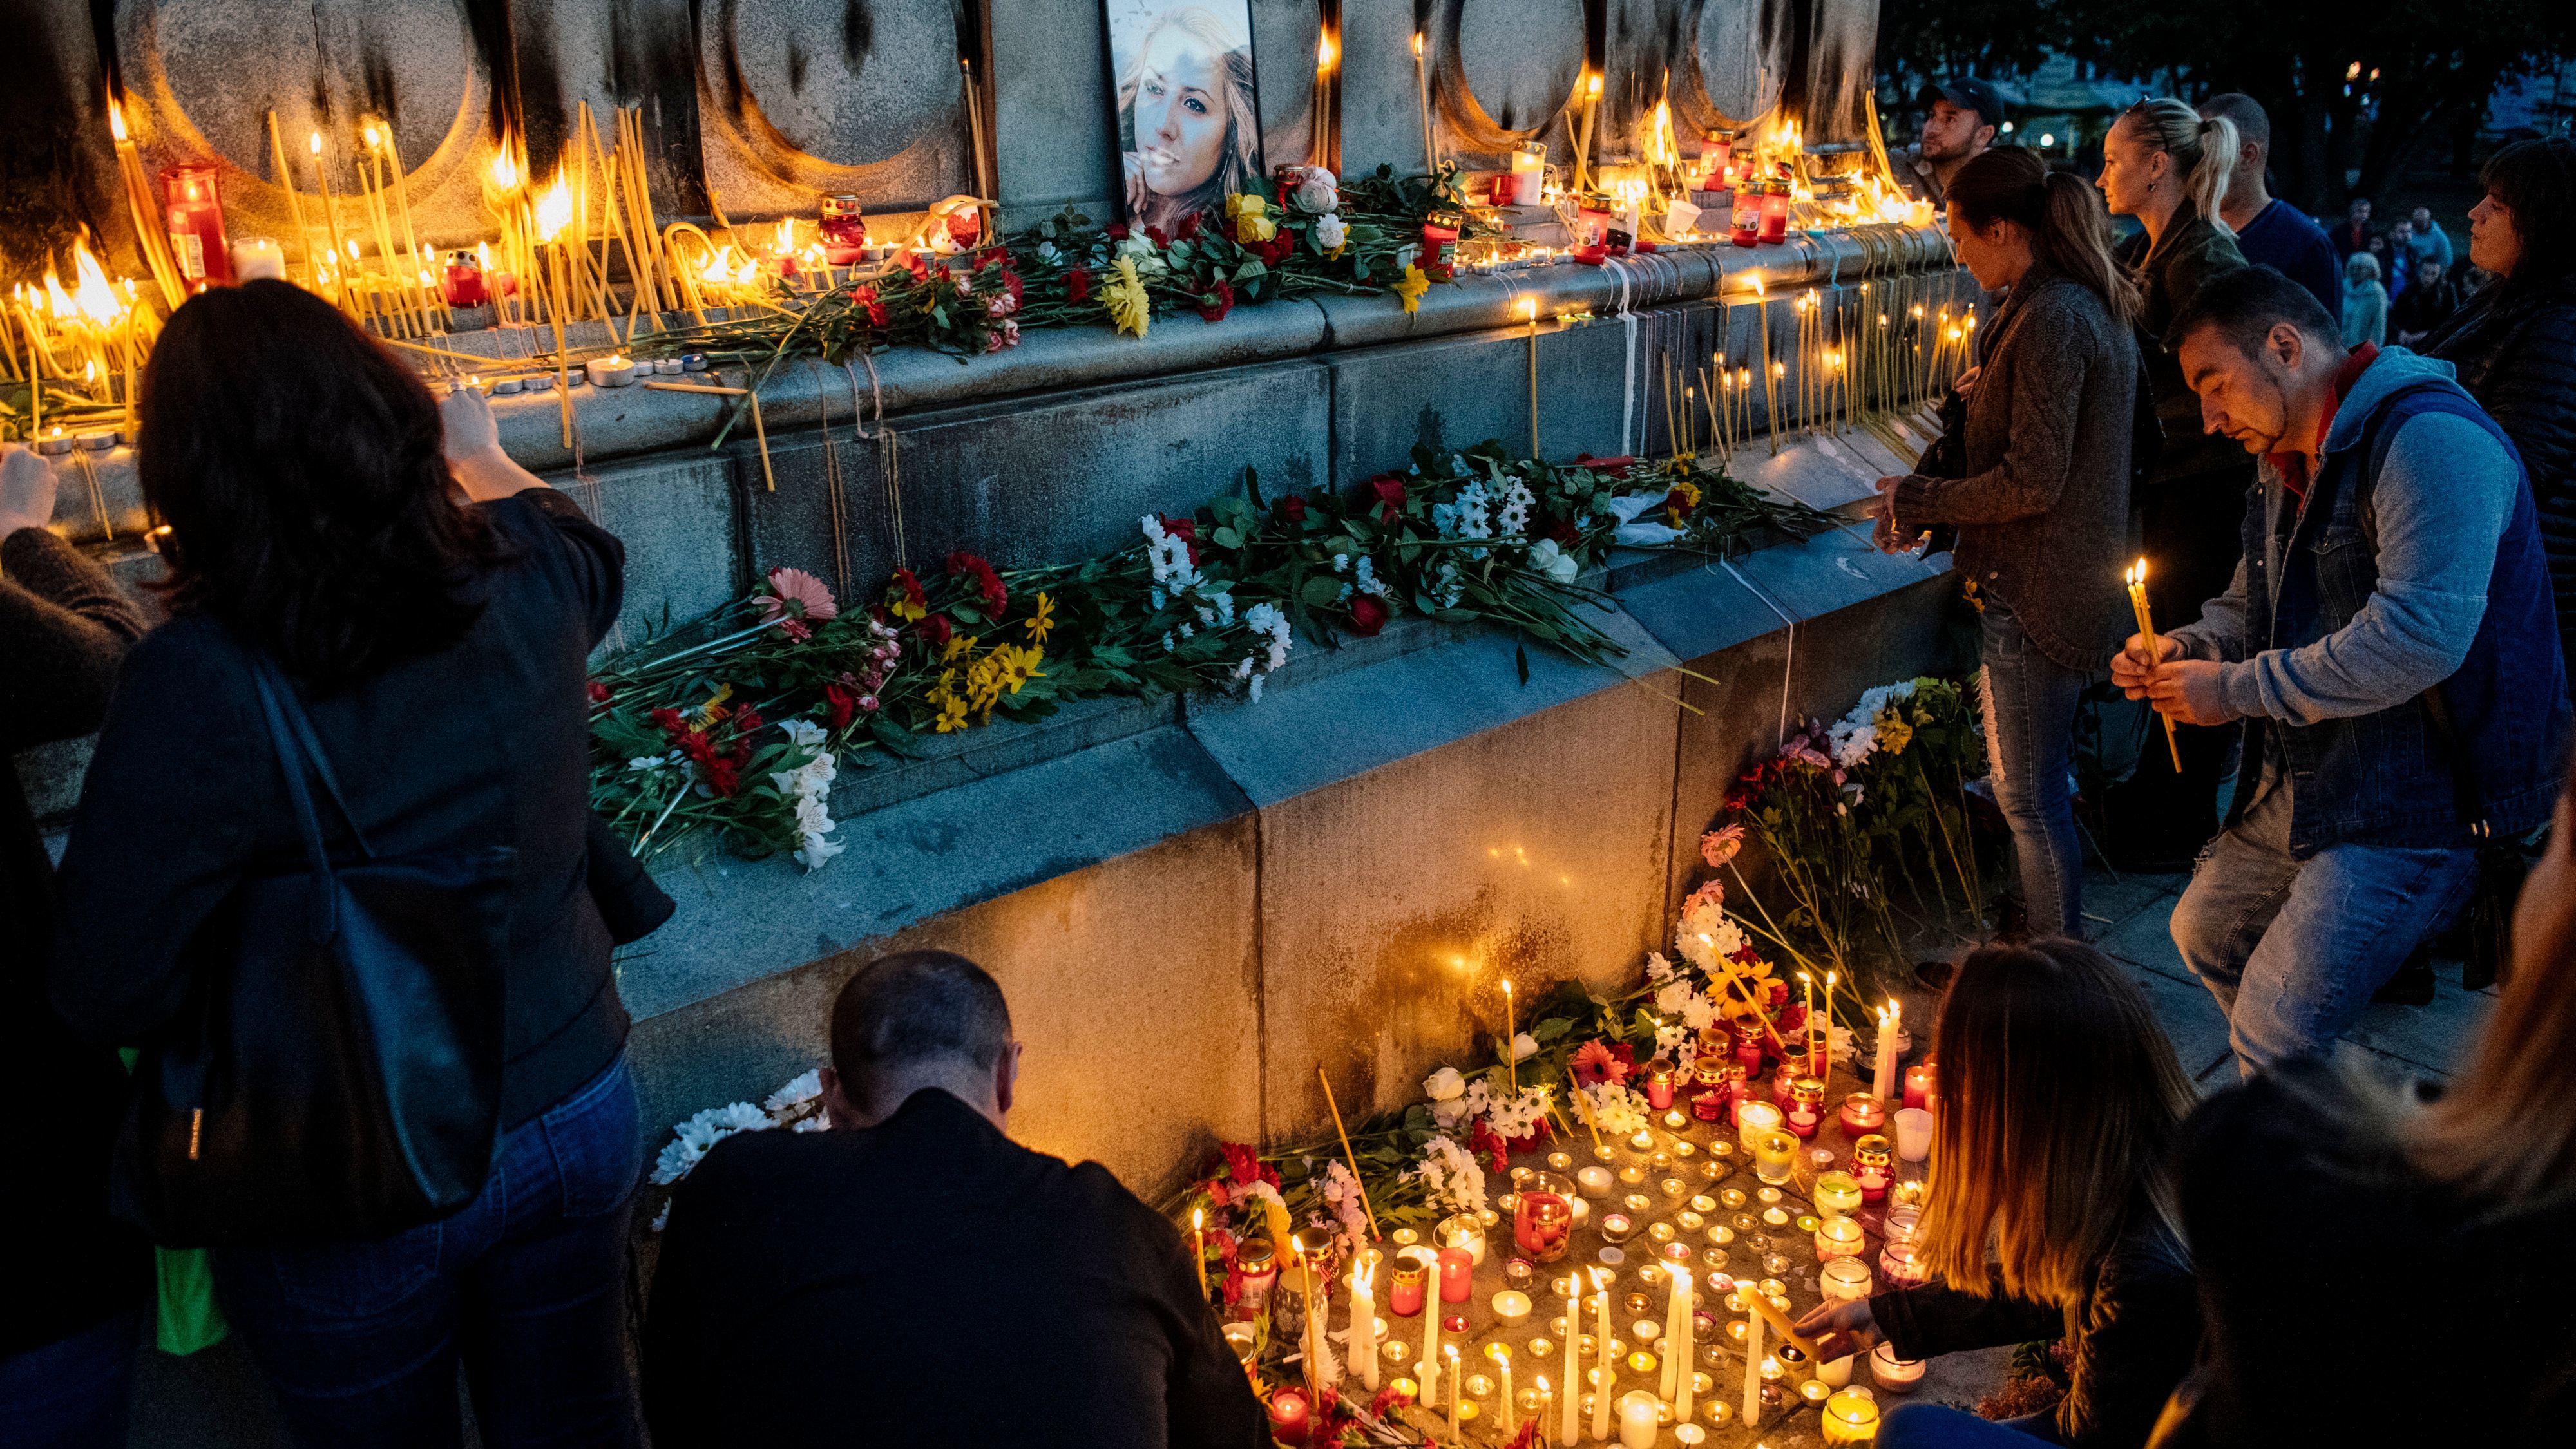 Bulgarians light candles during a vigil in memory of Viktoria Marinova in the city of Ruse on Monday.